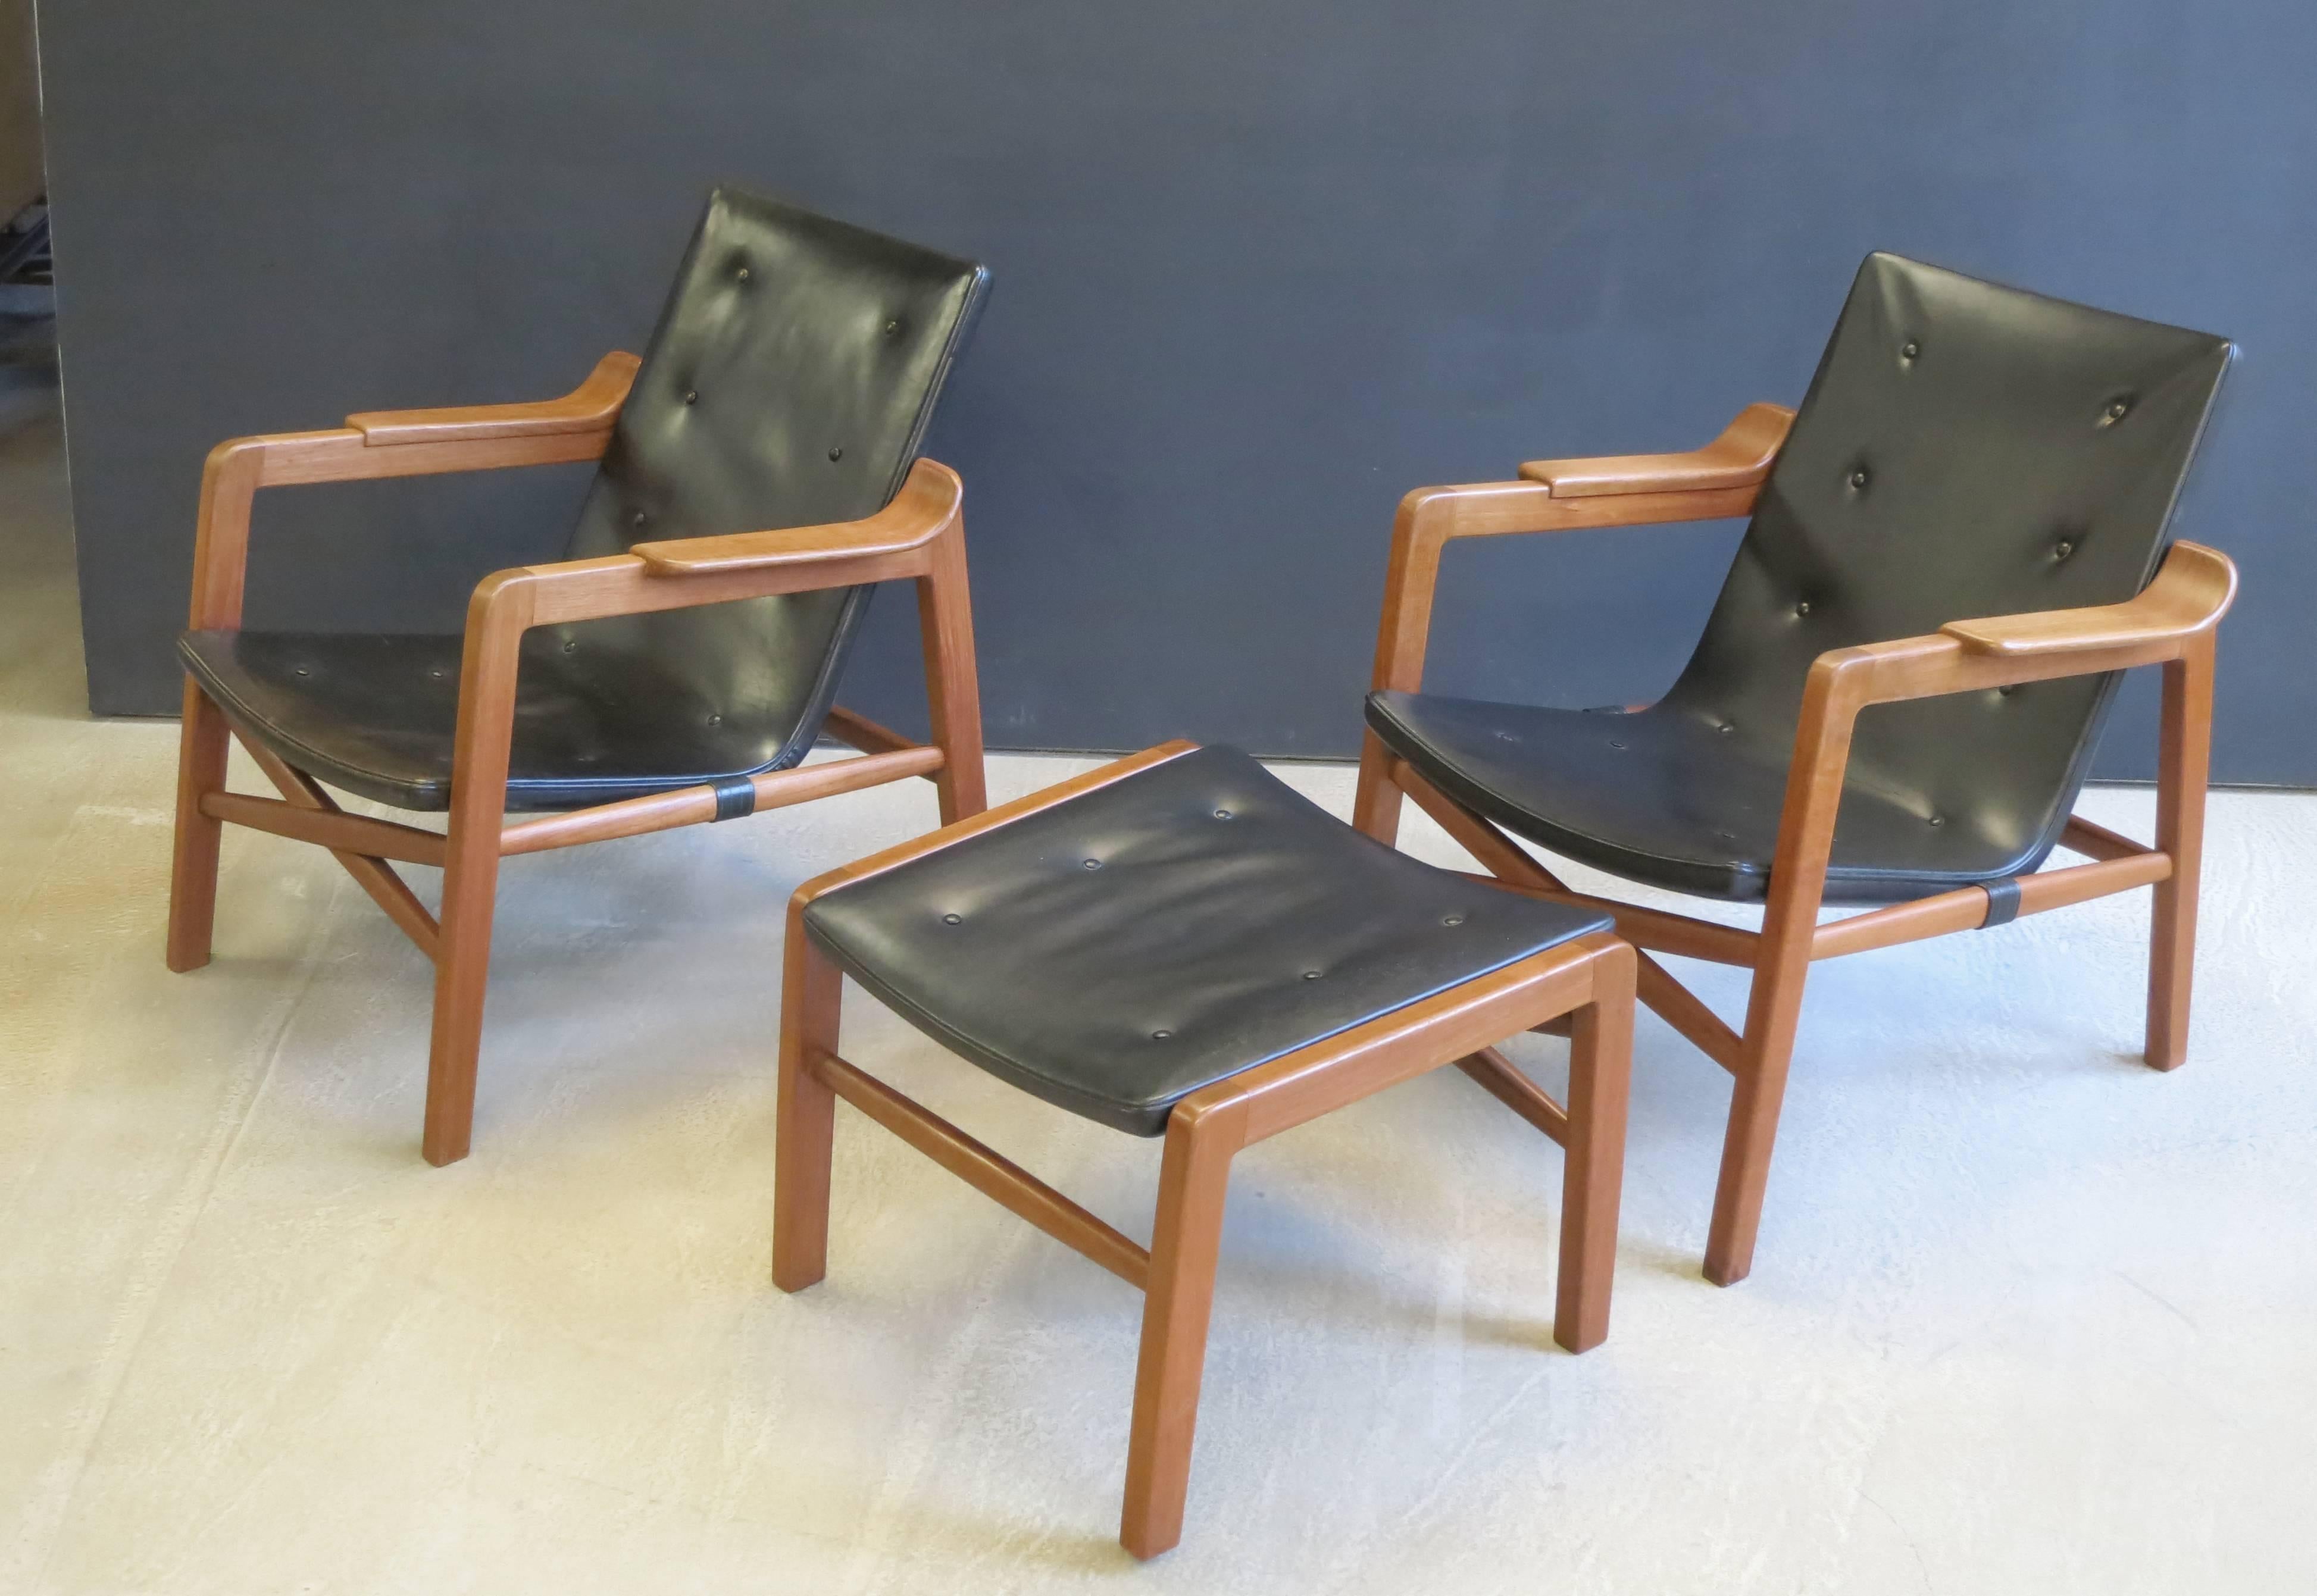 Group of “Fireplace Chairs” with Footstool by Tove & Edvard Kindt-Larsen.

About the chair:
This important chair, created to sit in a den in front of an open fireplace, was first exhibited at the Copenhagen Cabinetmaker’s Guild Exhibition in 1939